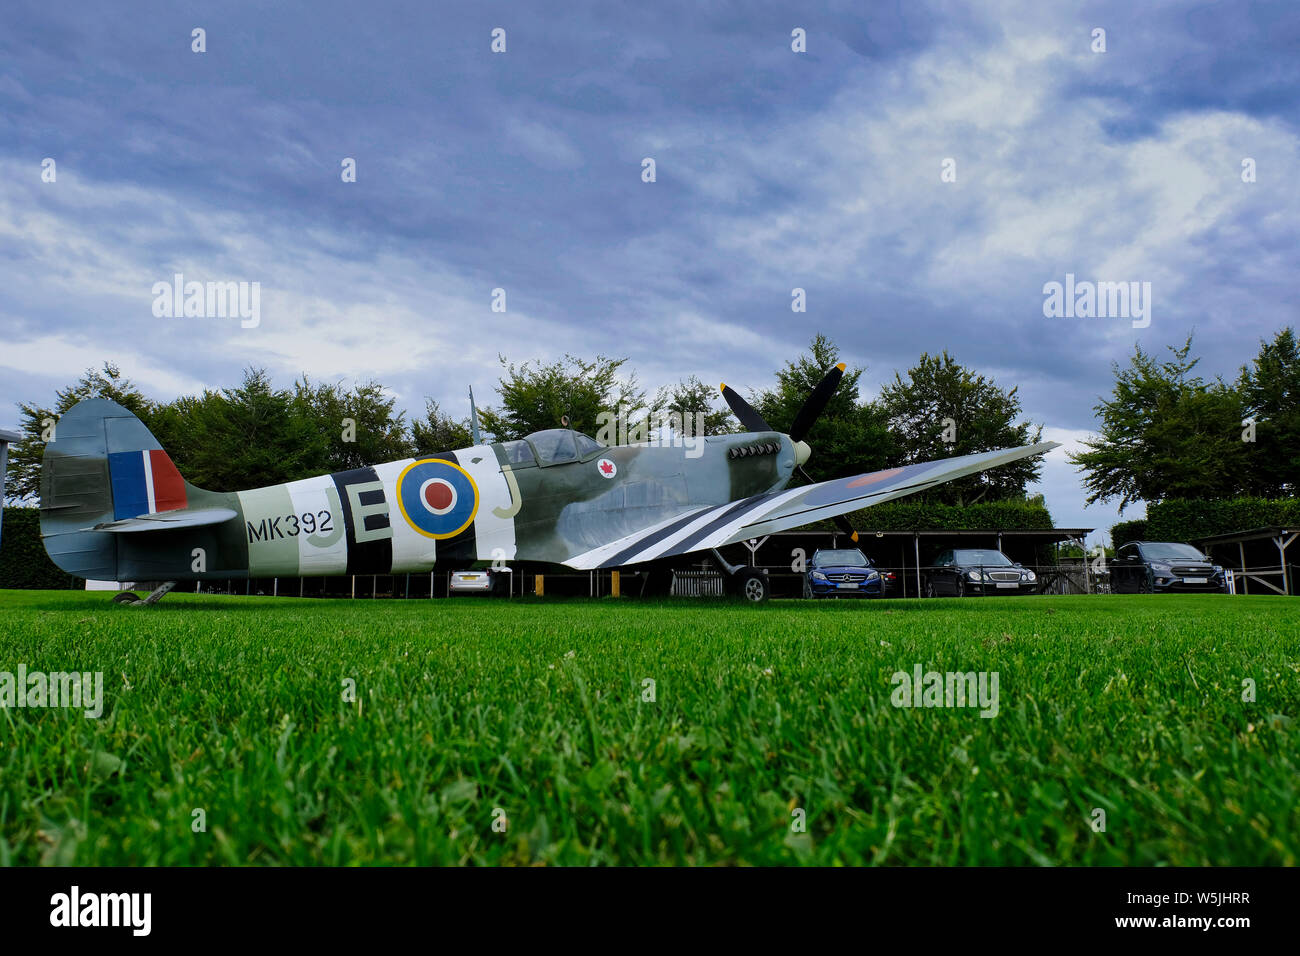 A wooden replica of Johnnie Johnson's Spitfire MK392. It is stored outside the Boultbee Flight Academy at Goodwood Aerodrome. Stock Photo